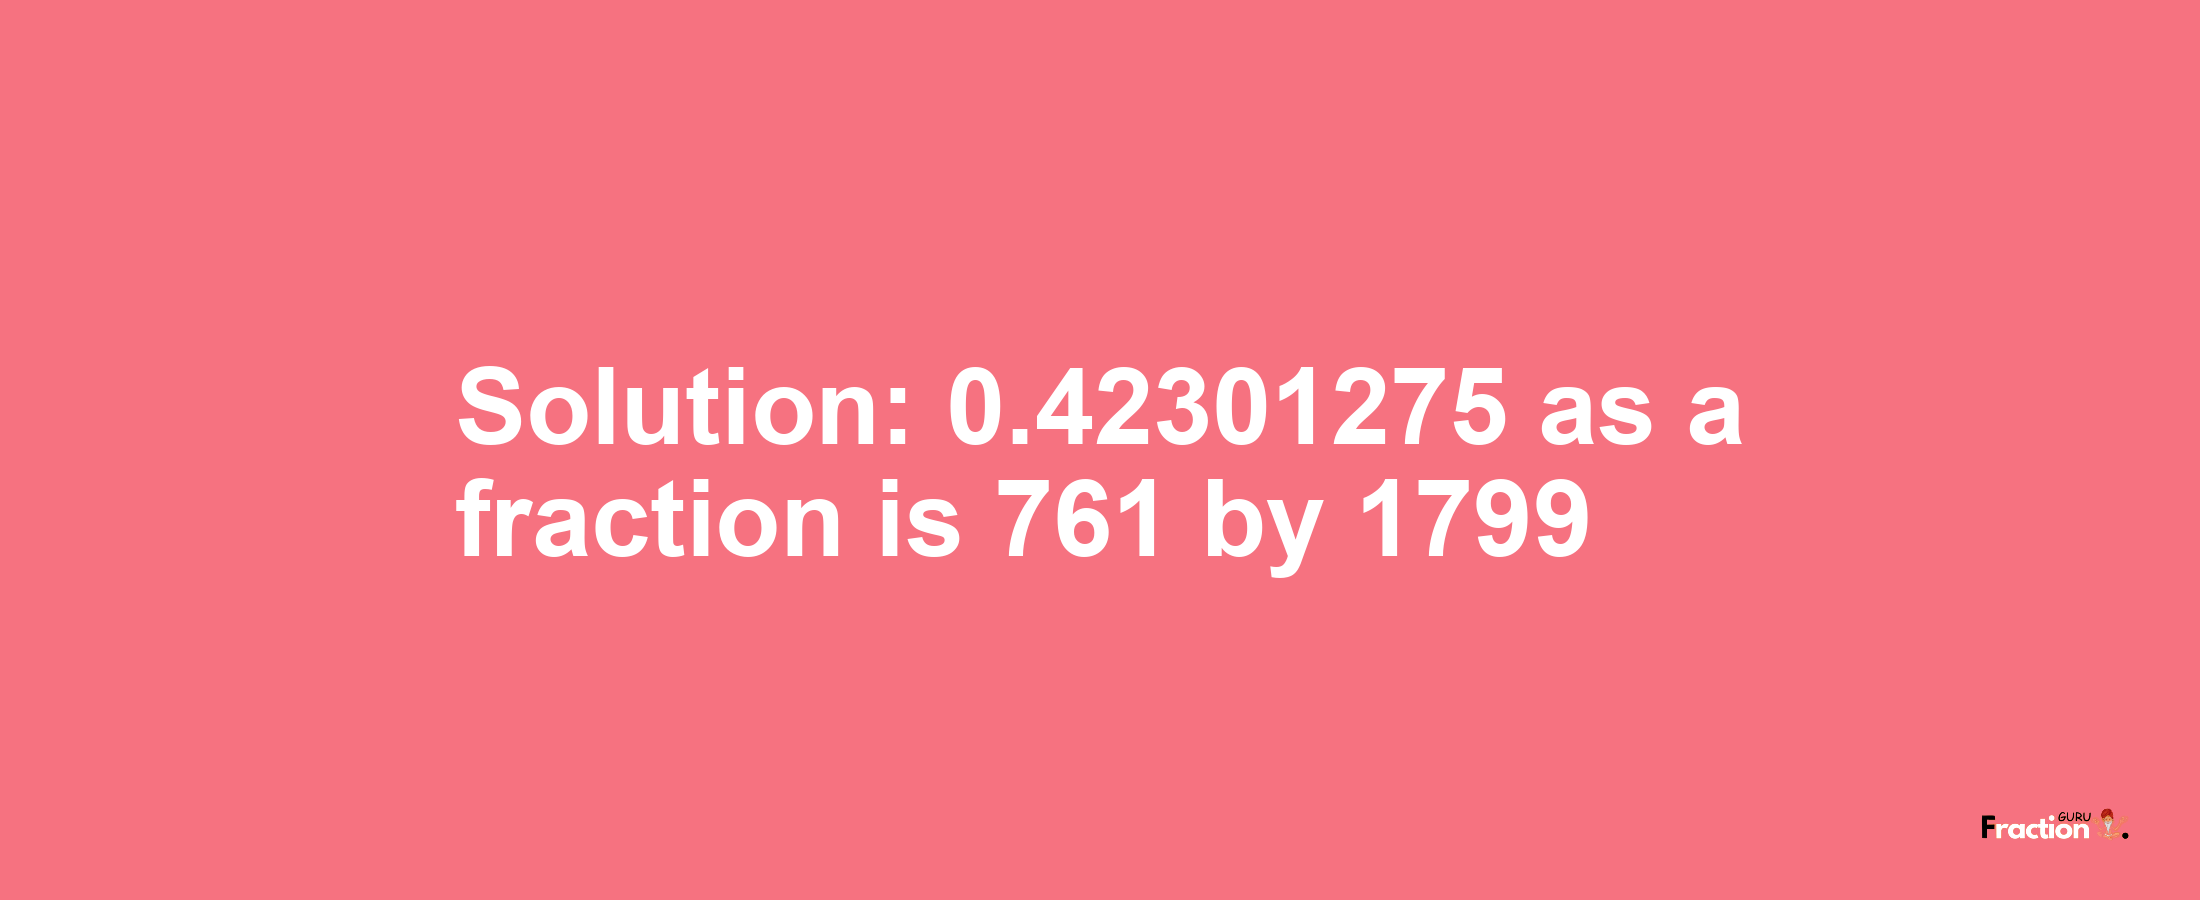 Solution:0.42301275 as a fraction is 761/1799